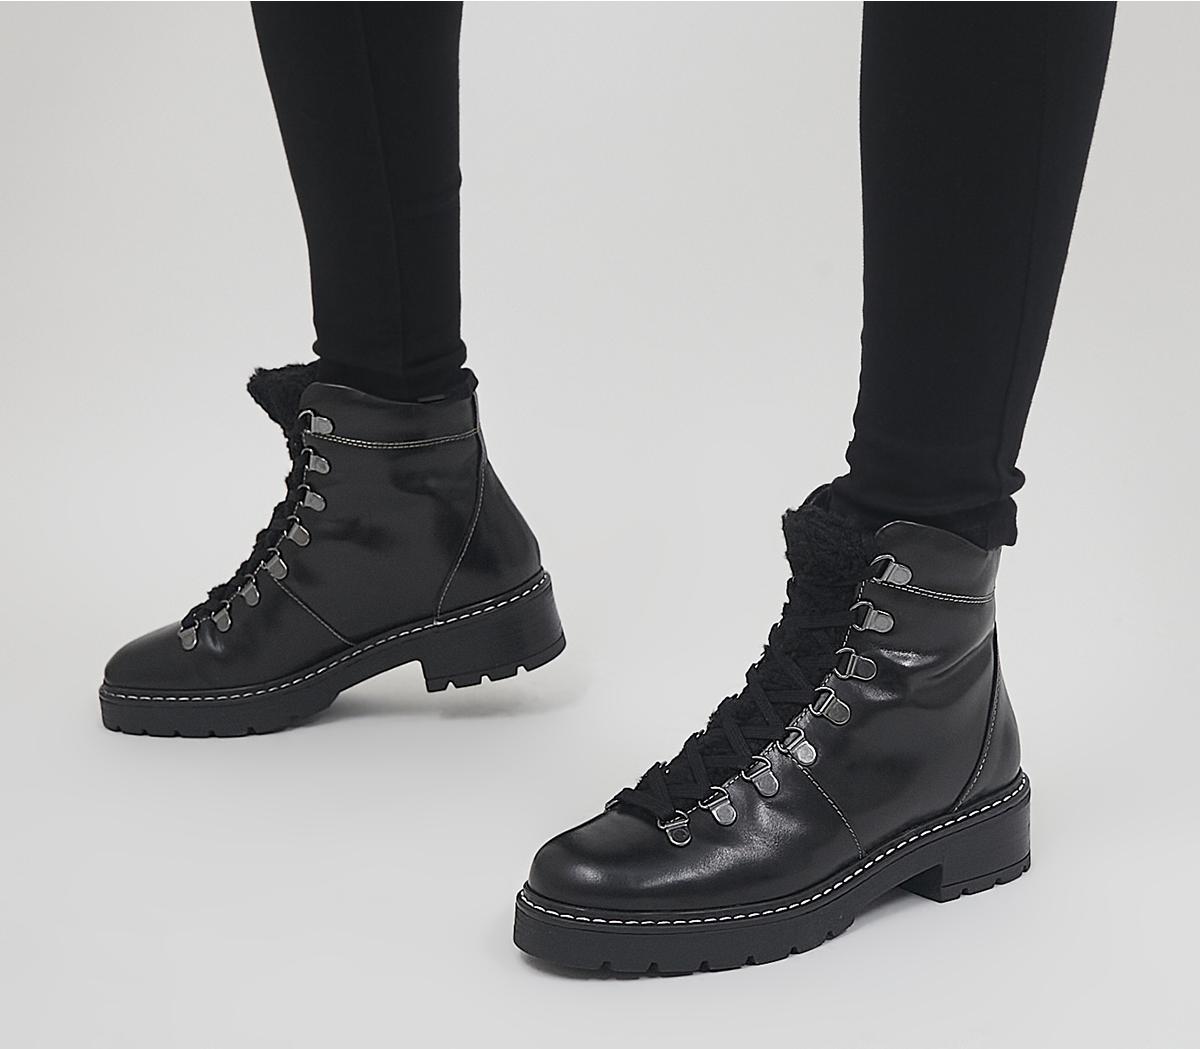 OfficeAleea Shearling Hiker Lace Up Ankle BootsBlack Leather